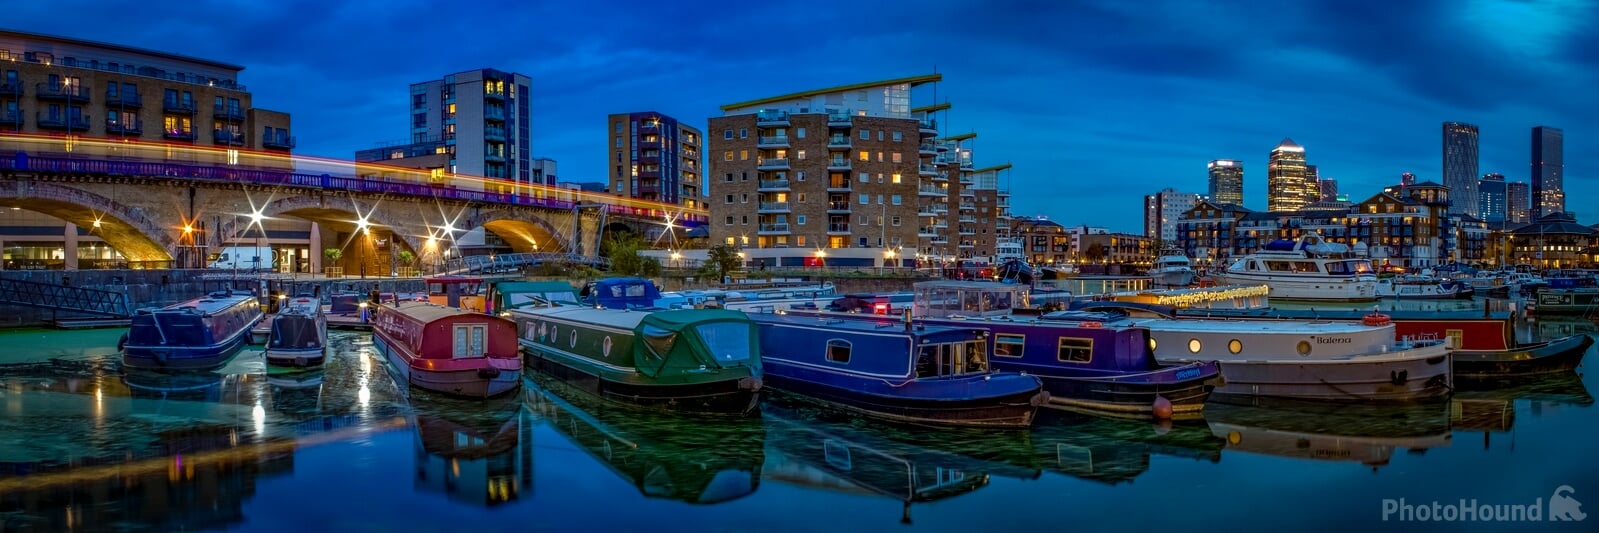 Image of Limehouse Basin by Doug Stratton